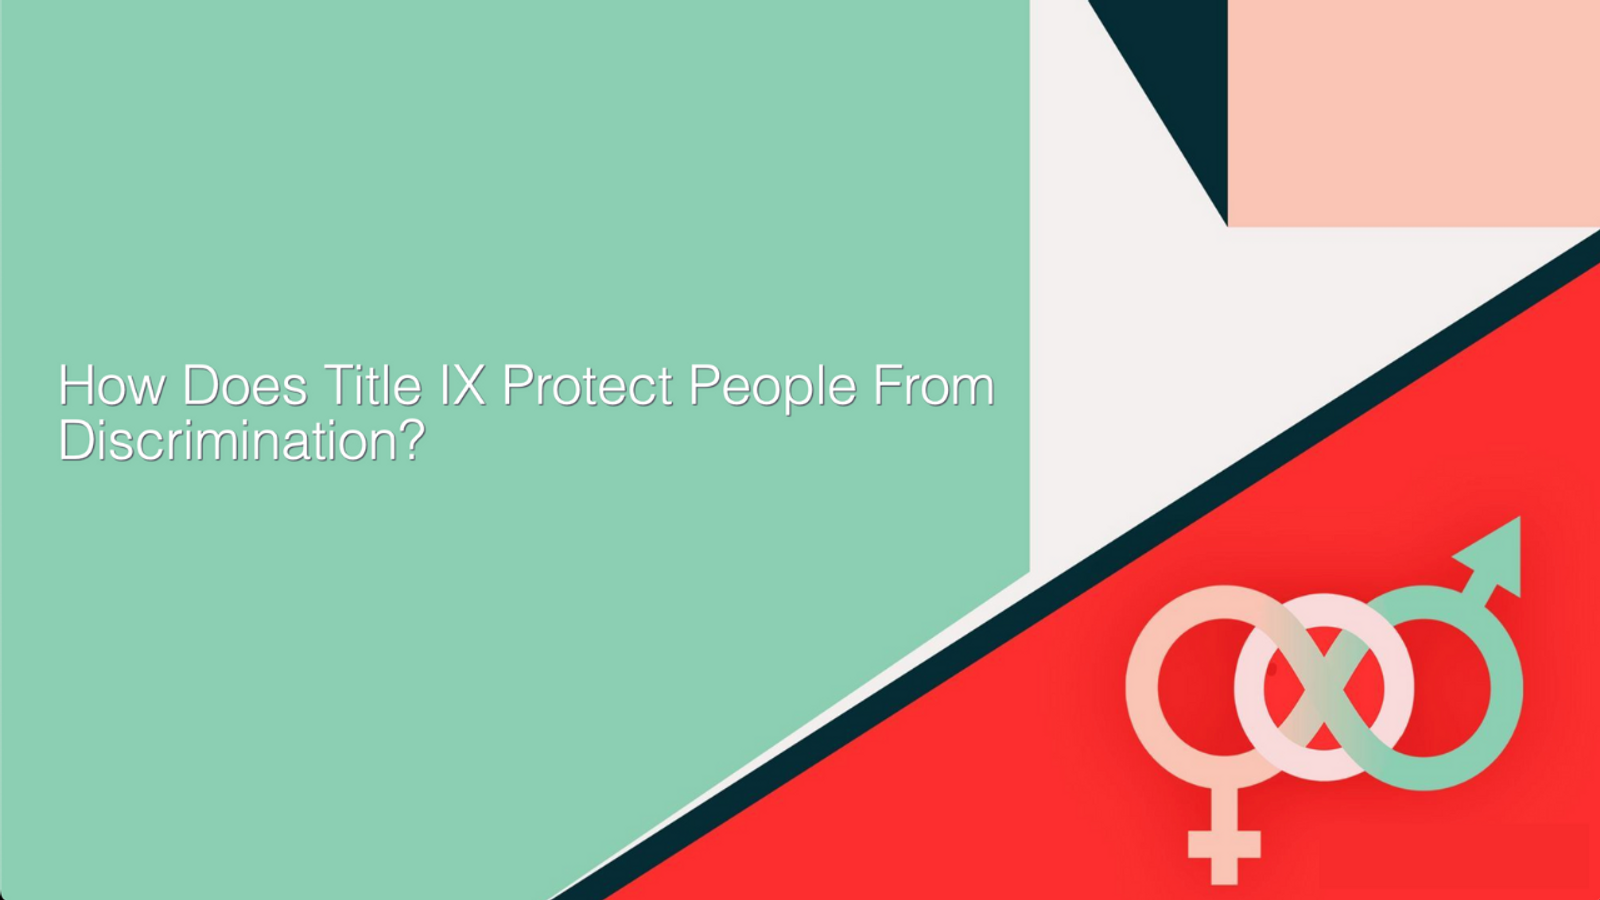 How does Title IX Protect People From Discrimination?